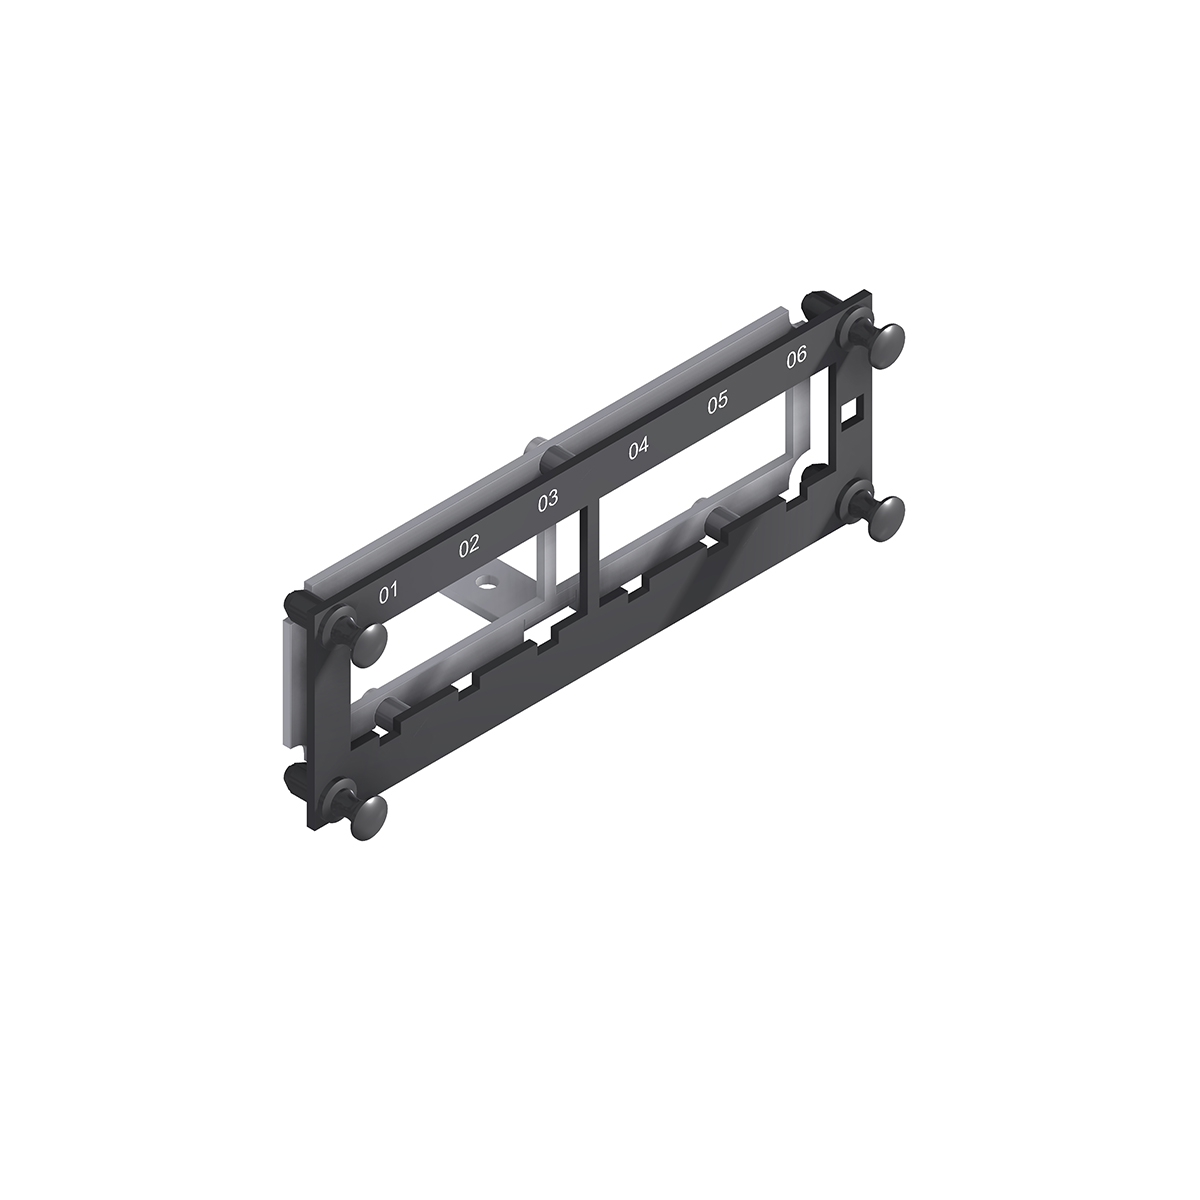 SMAP-G2 SD 1 HU 1/4 part front plate for RJ45 Jacks